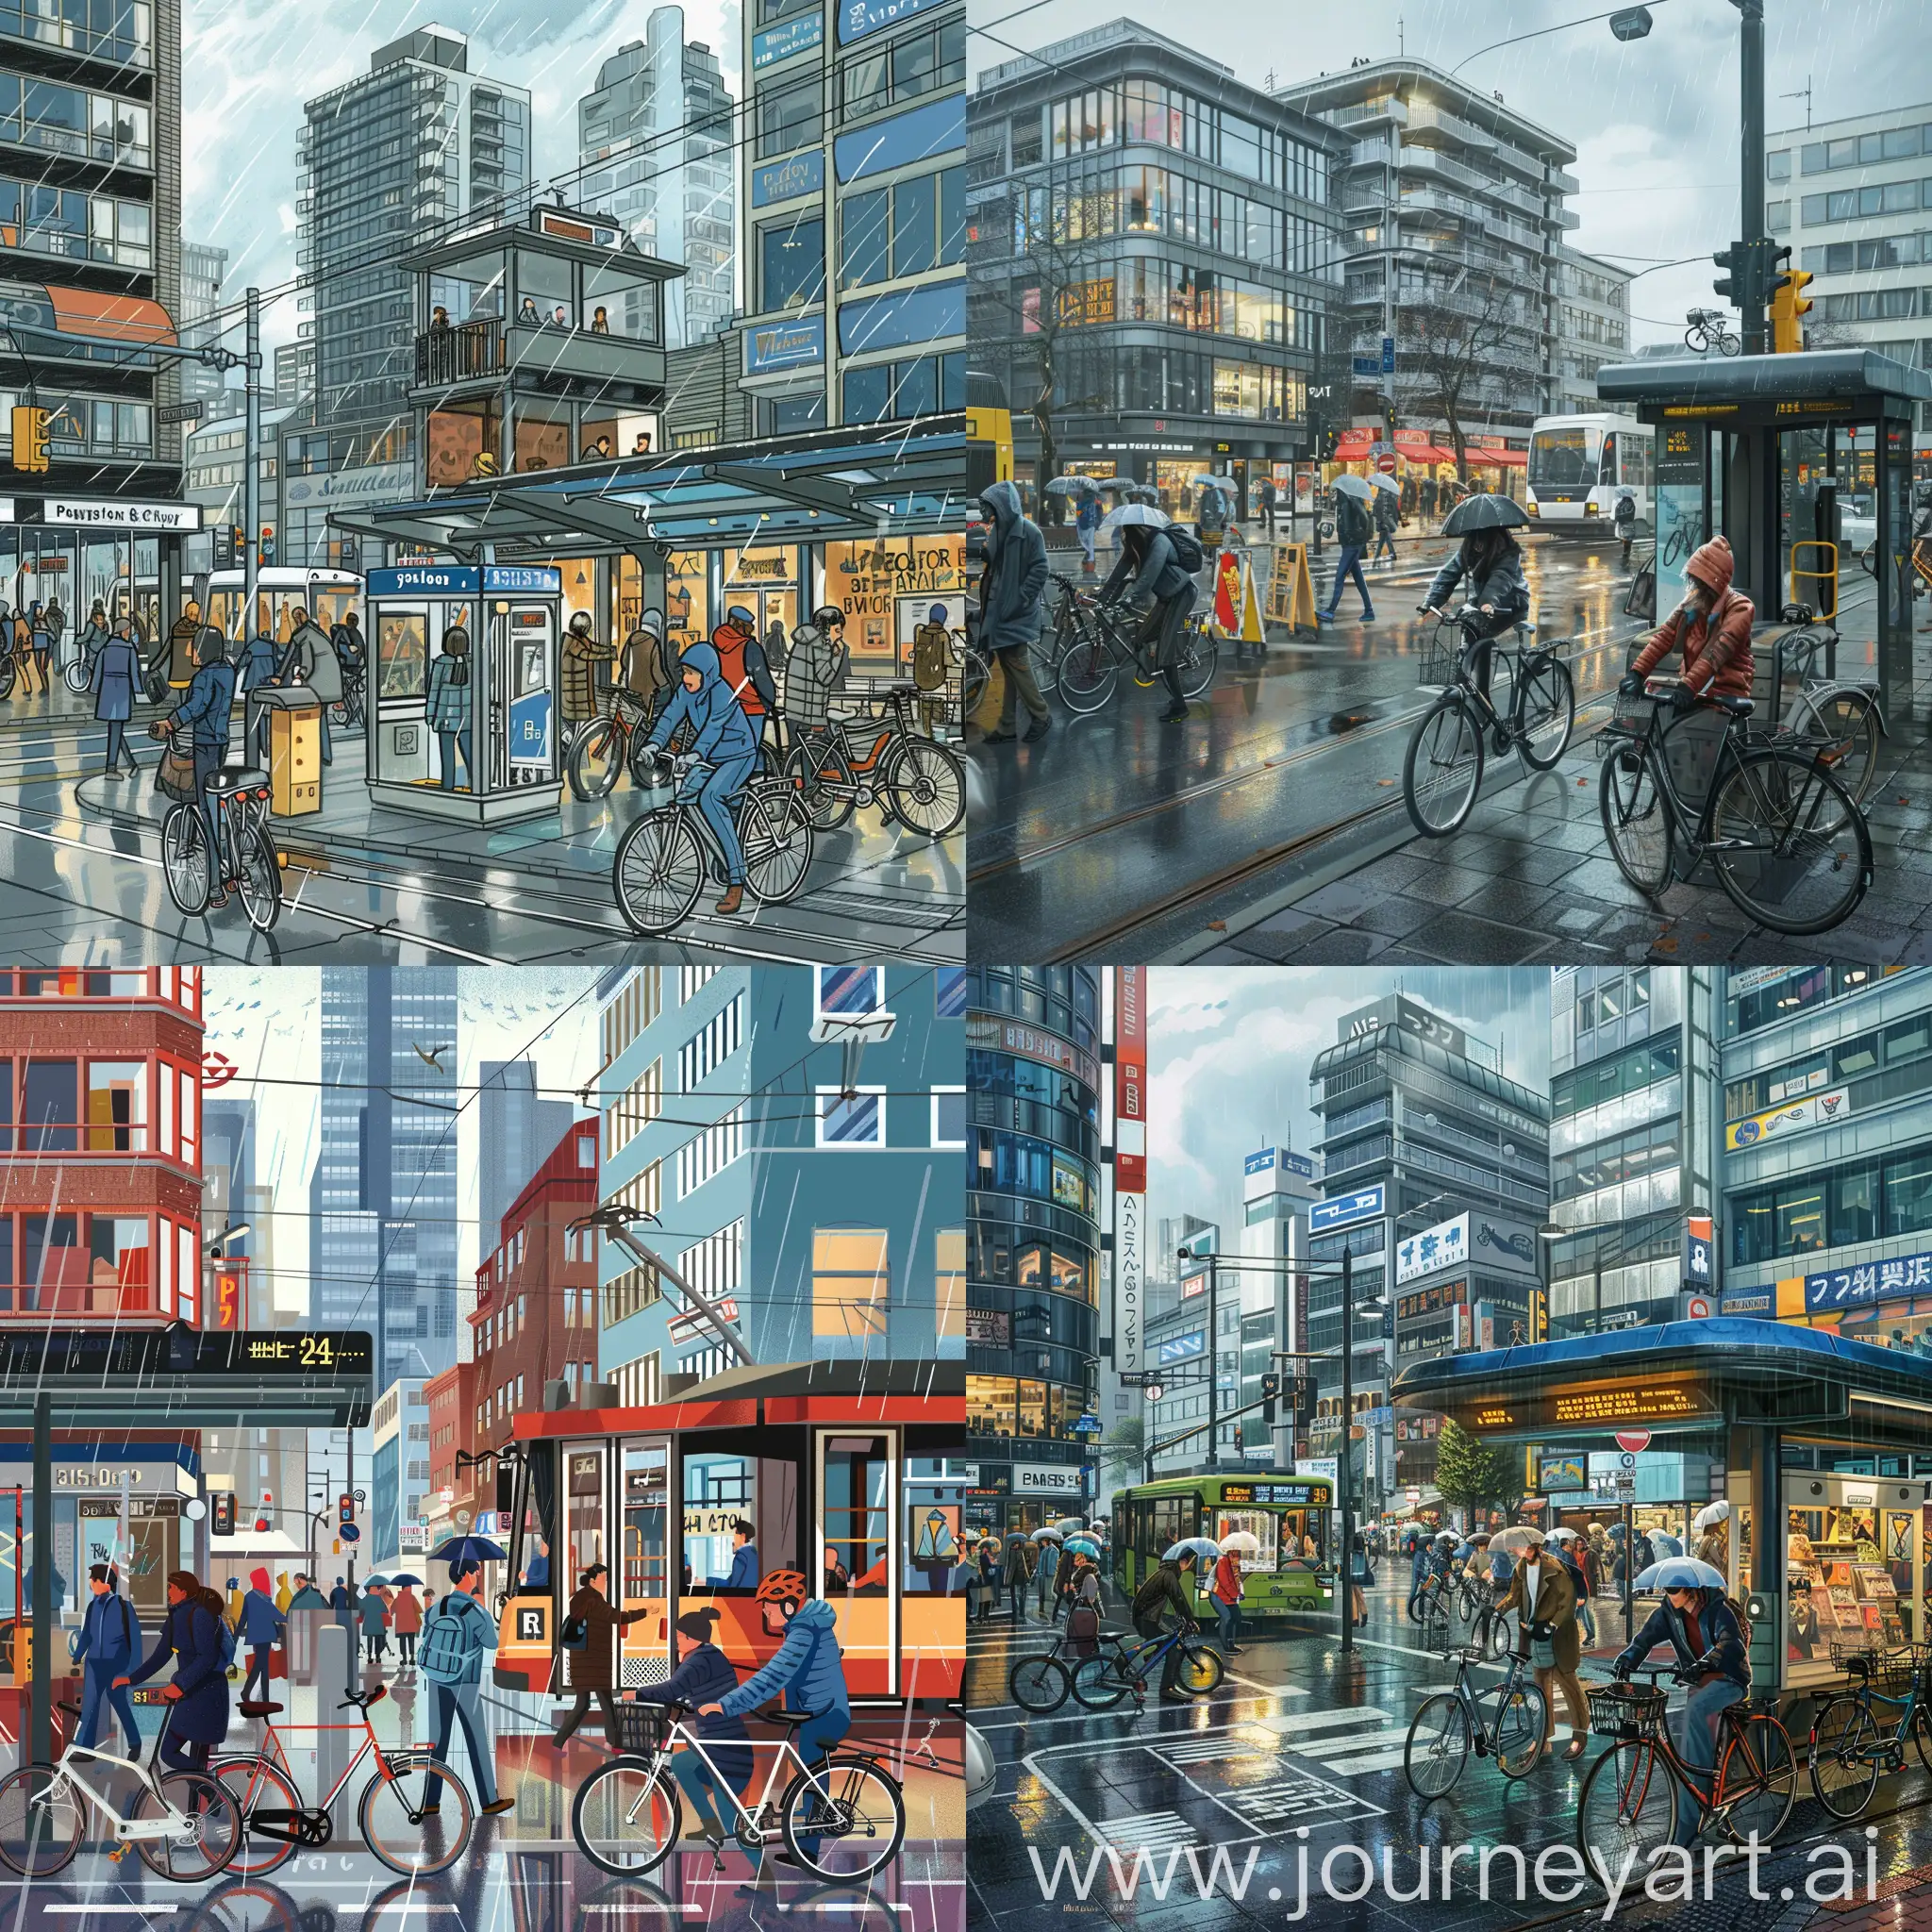 Busy-Urban-Cityscape-with-Rain-Cyclists-and-Pedestrians